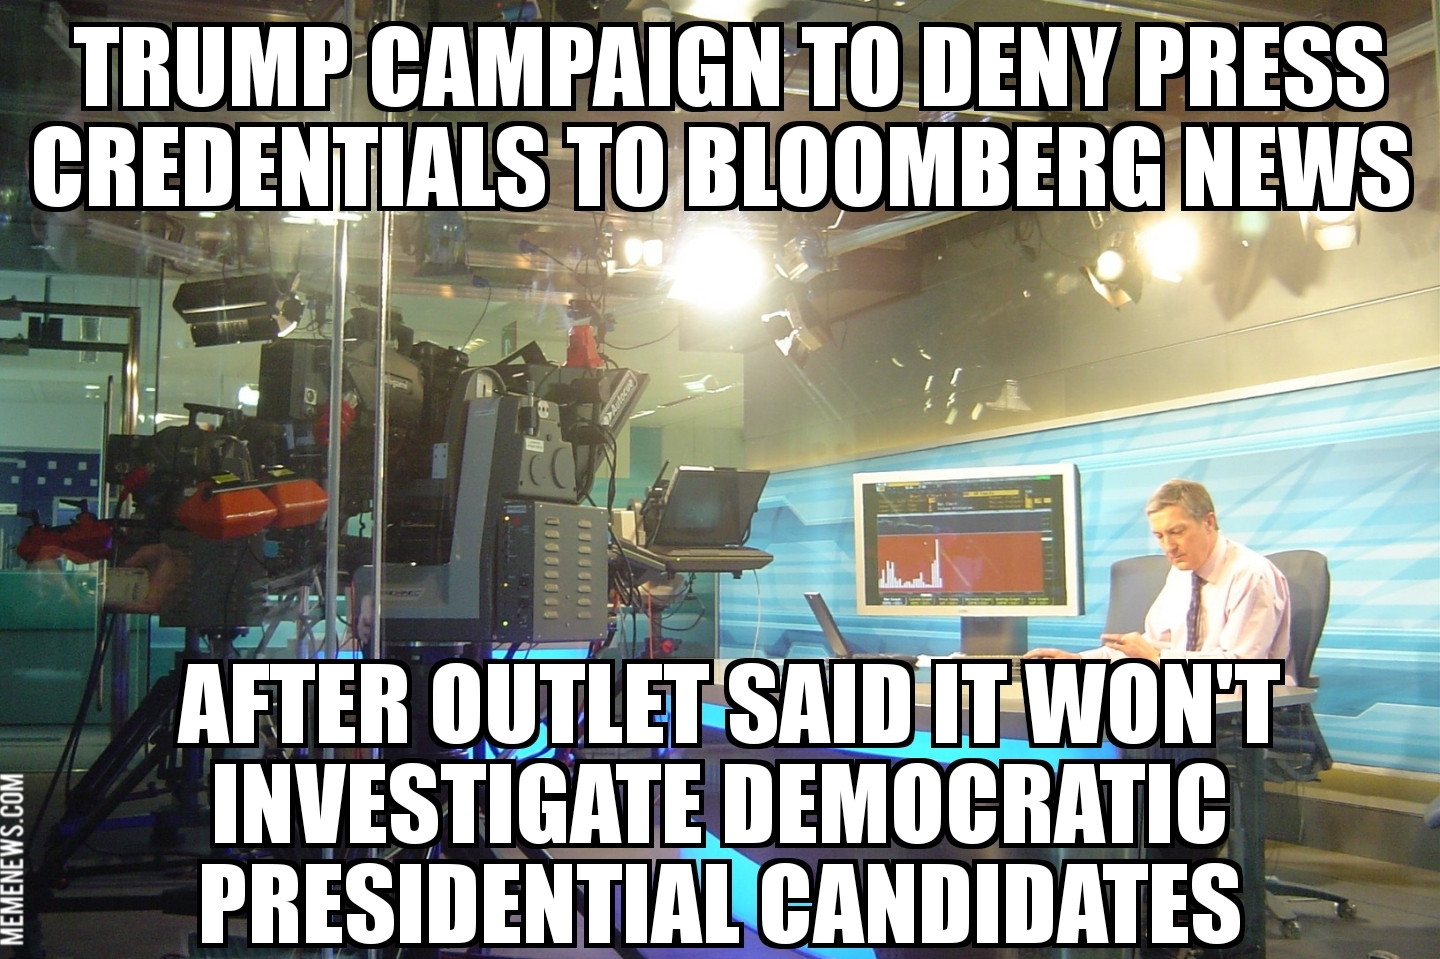 Trump Campaign to deny press credentials to Bloomberg News